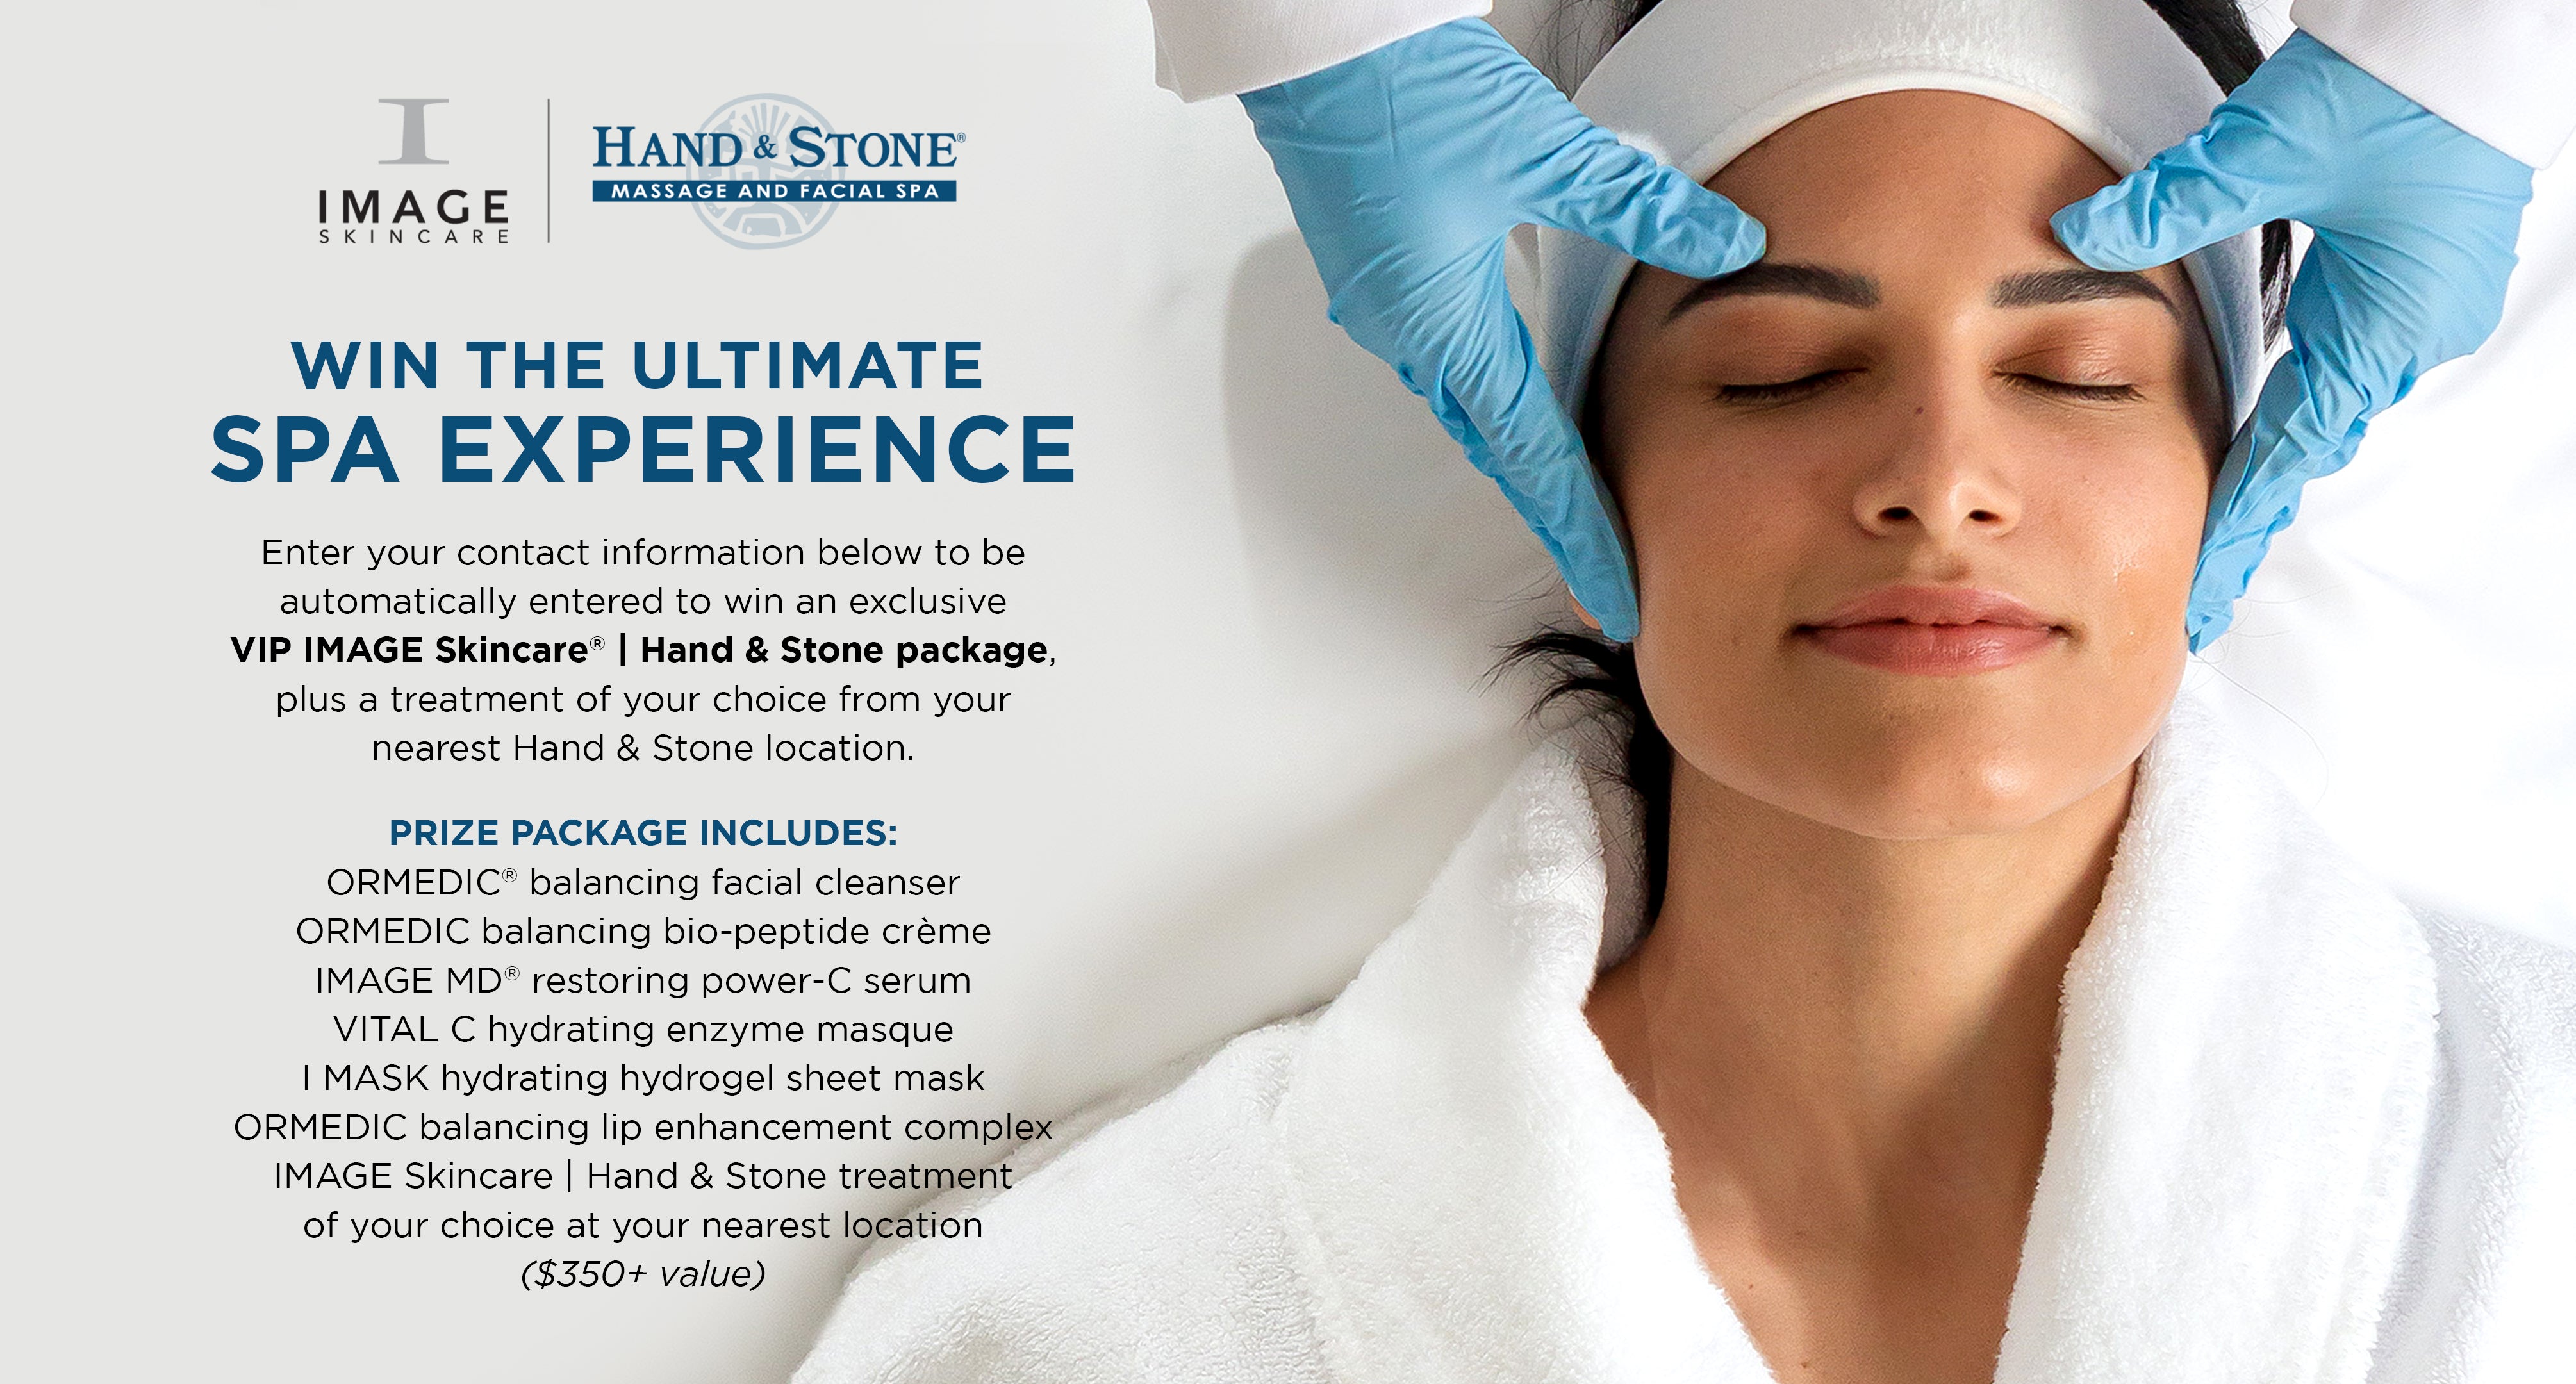 IMAGE x Hand and Stone Entry Form Image Skincare